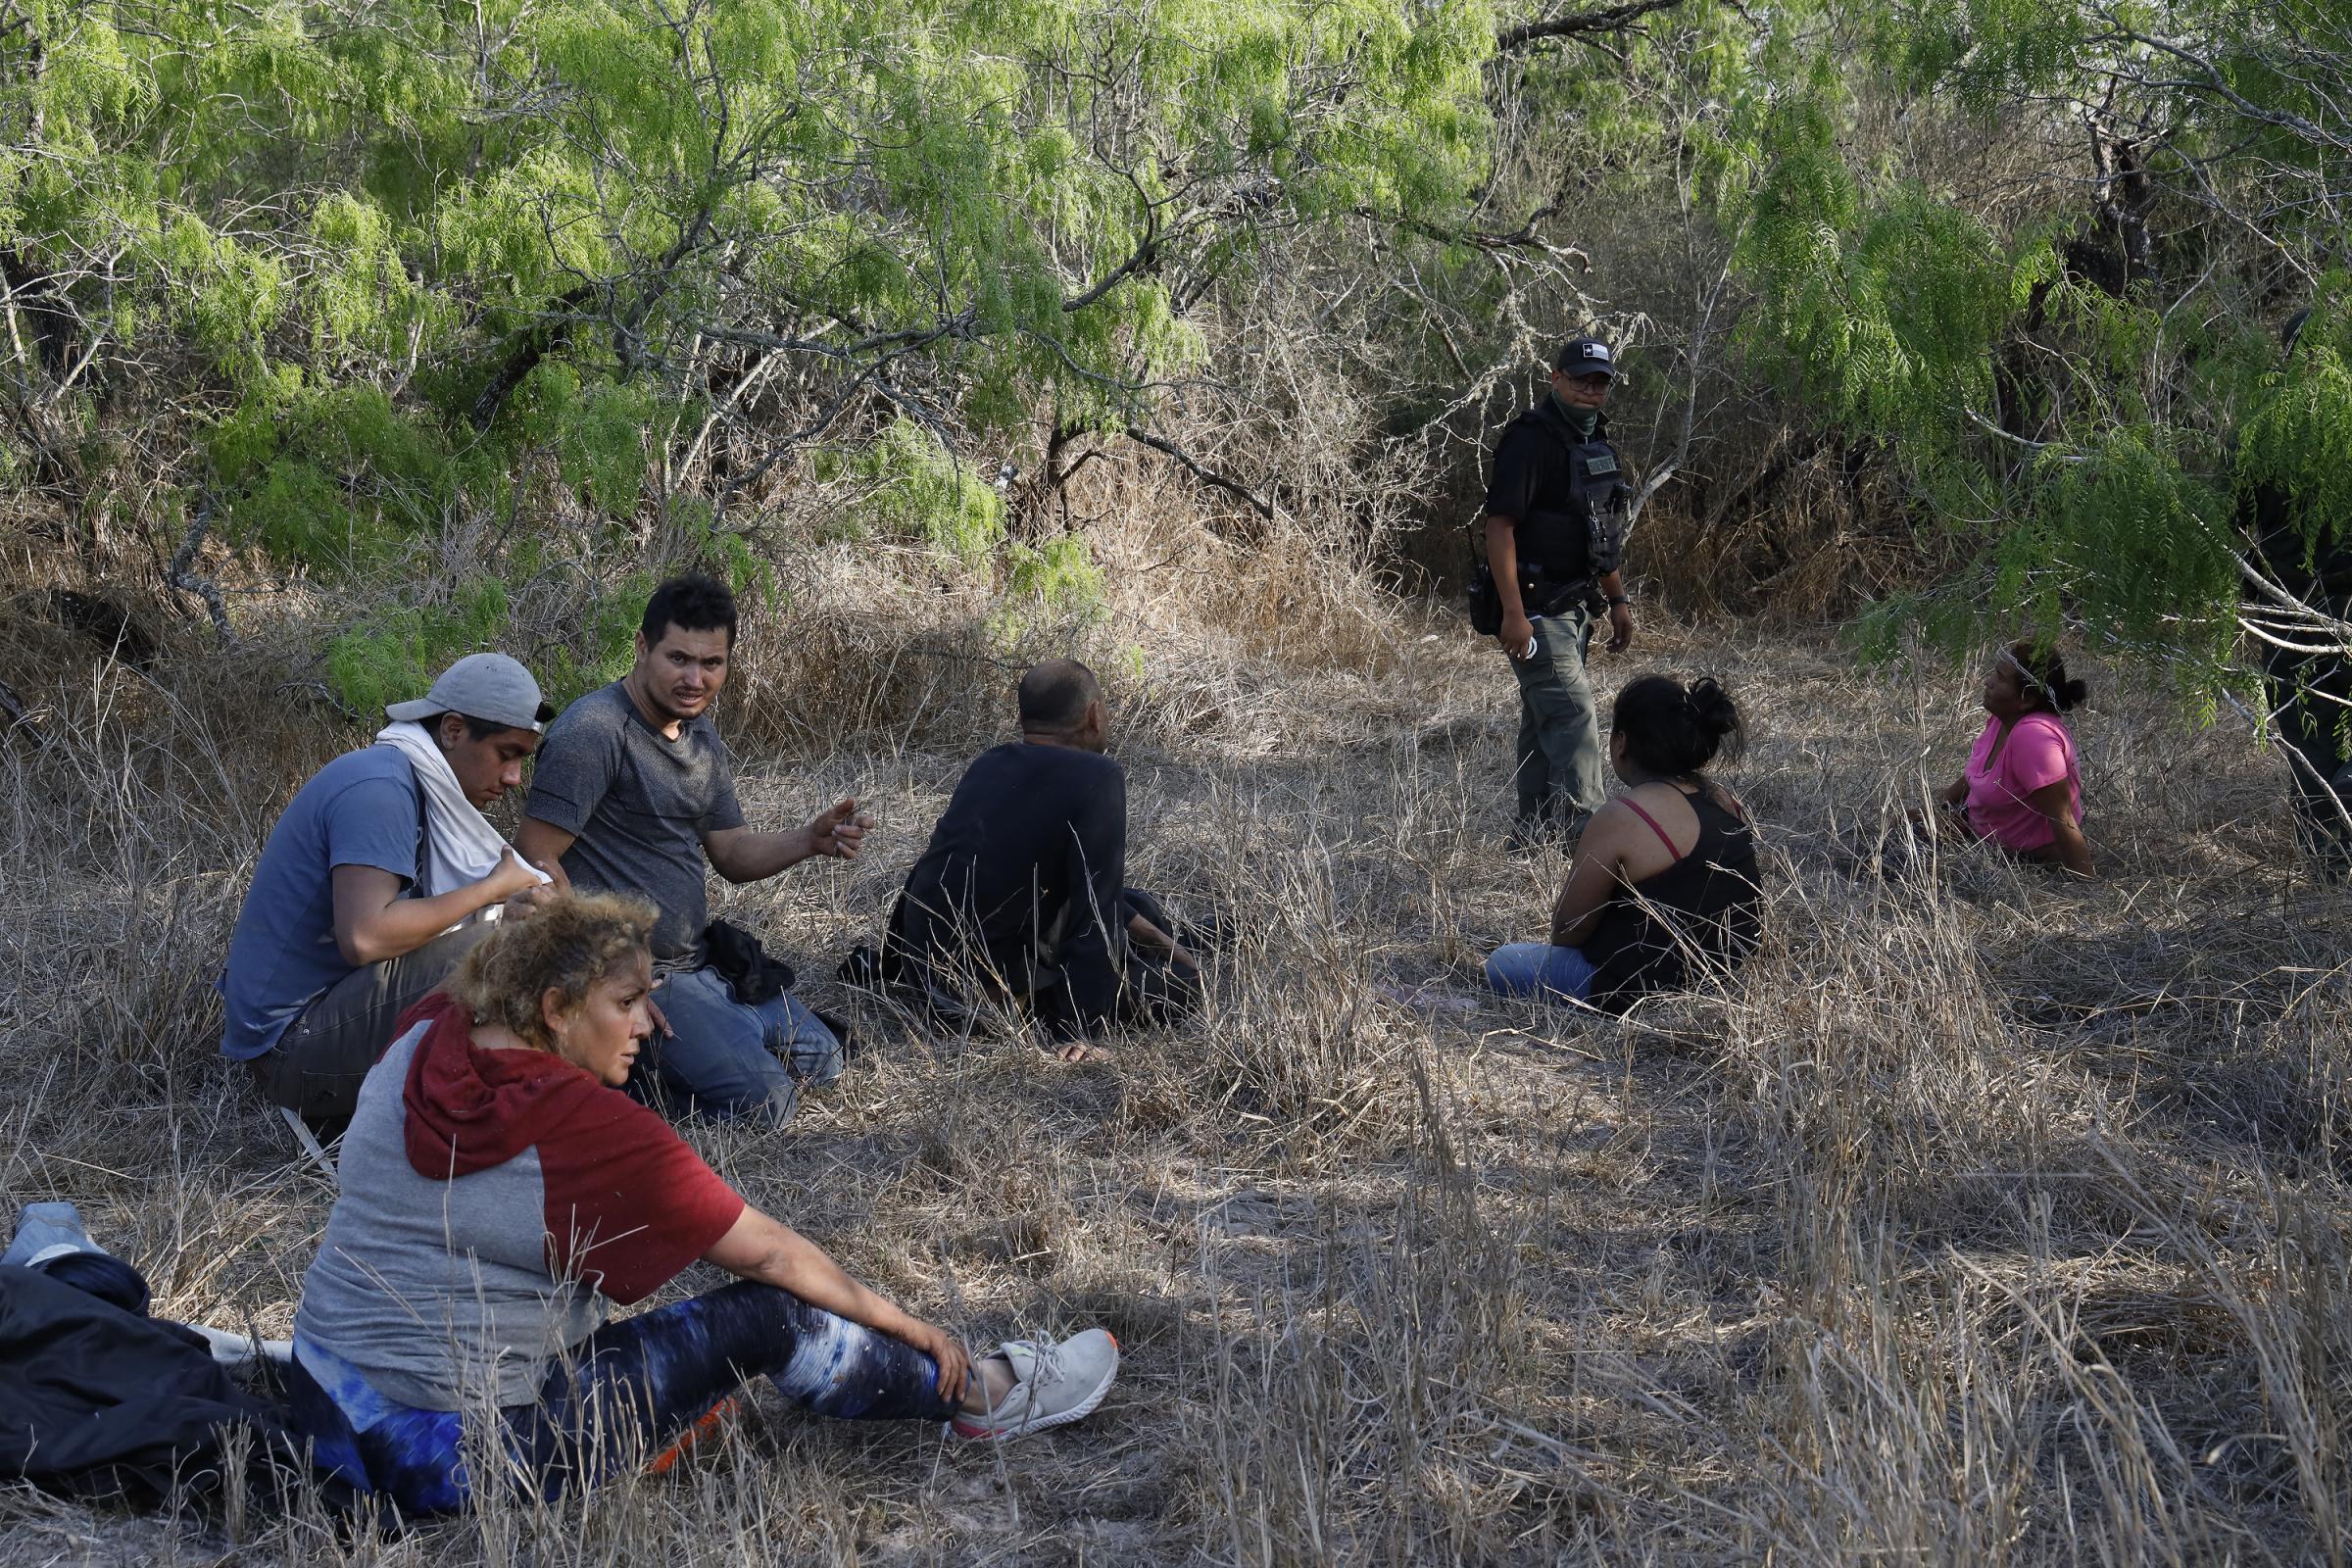 Migrants in Distress, Falfurrias, Texas - The Brooks County Sherrif's Office (BCSO) received a...